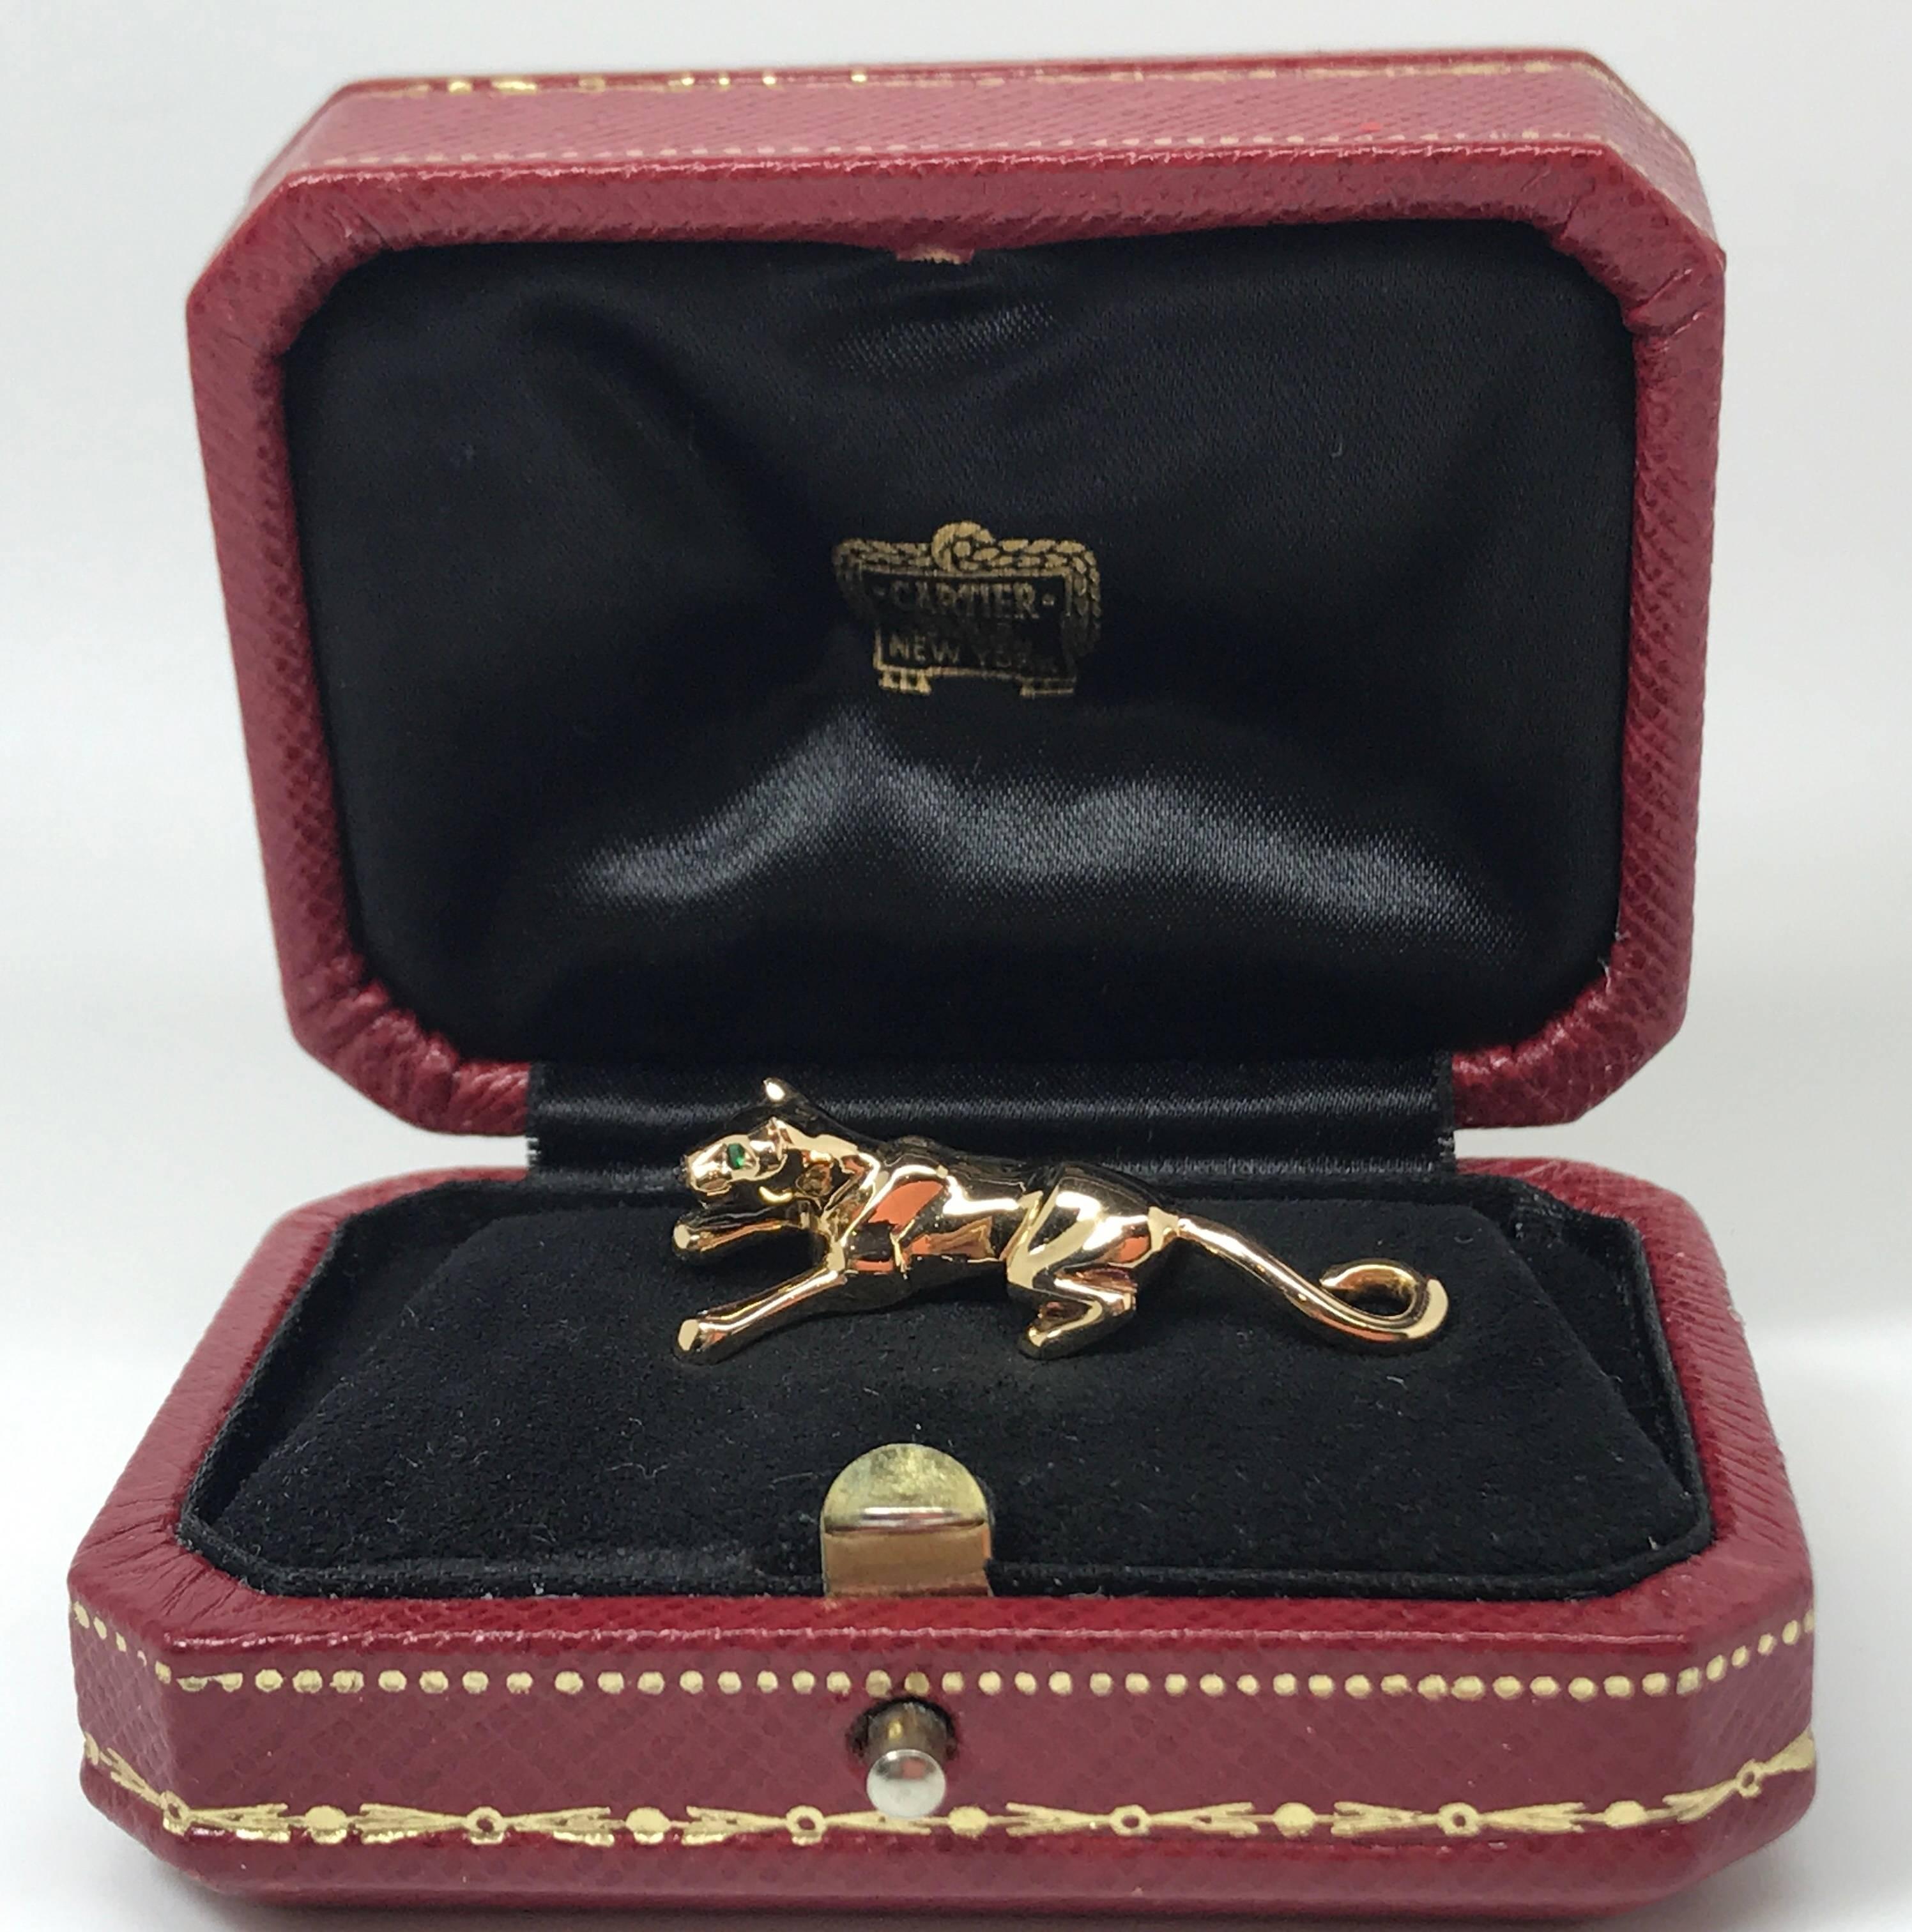 A Cartier gem-set panther pin brooch set in 18k yellow gold. The brooch features a stylised panther, with onyx nose and green garnet eyes. Signed and numbered Cartier, 615603. French assay marks, sold with the original Cartier case.
Length: